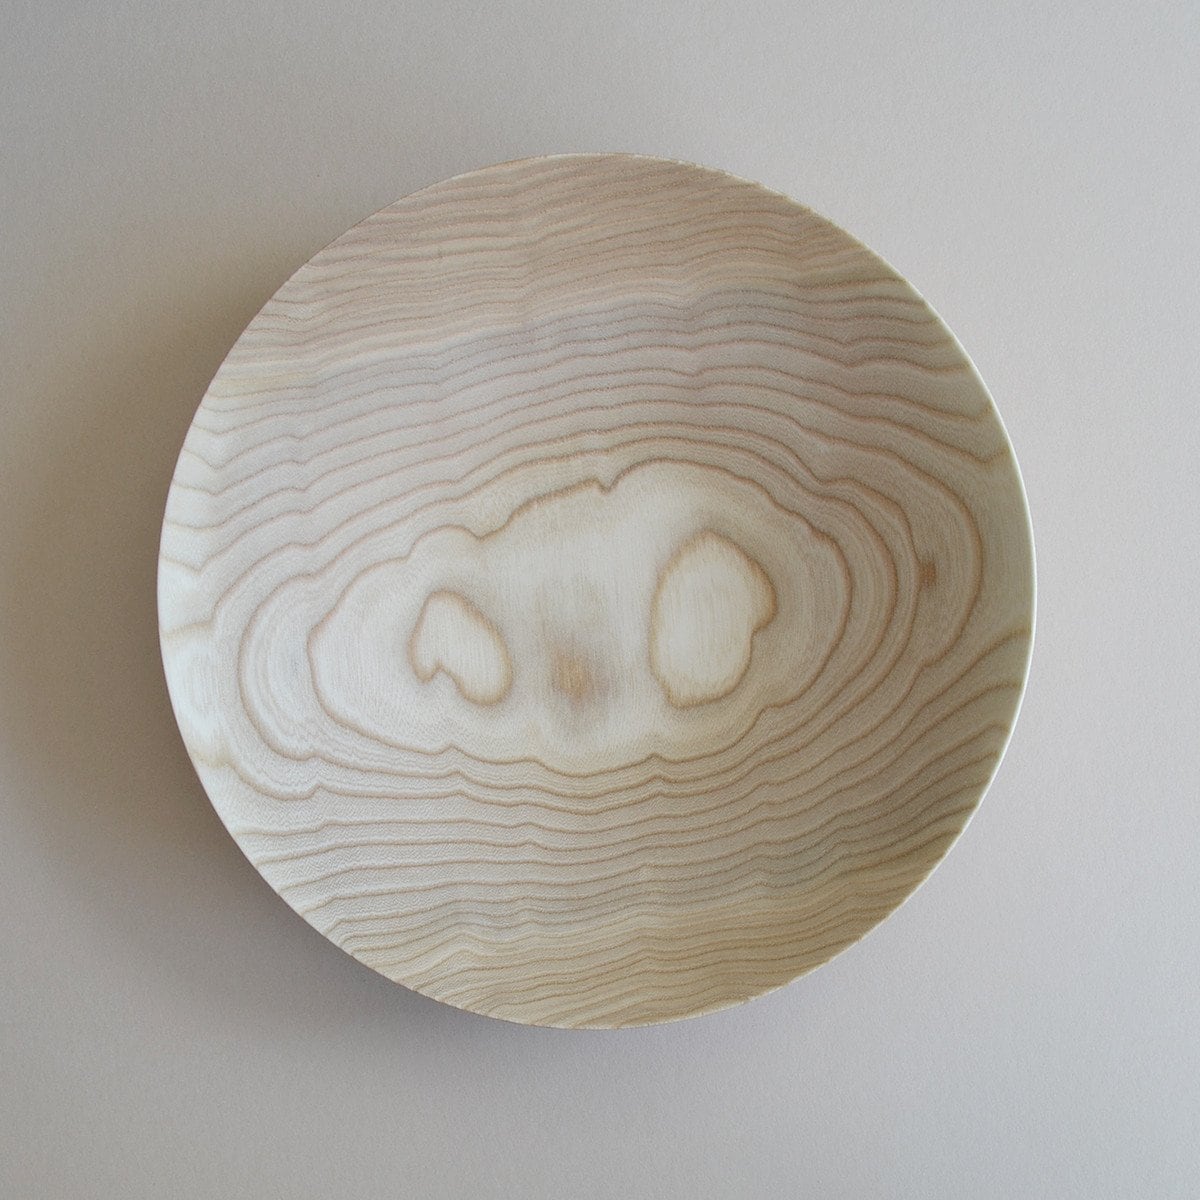 A Kihachi Wooden Plate - Medium with a pattern on it.